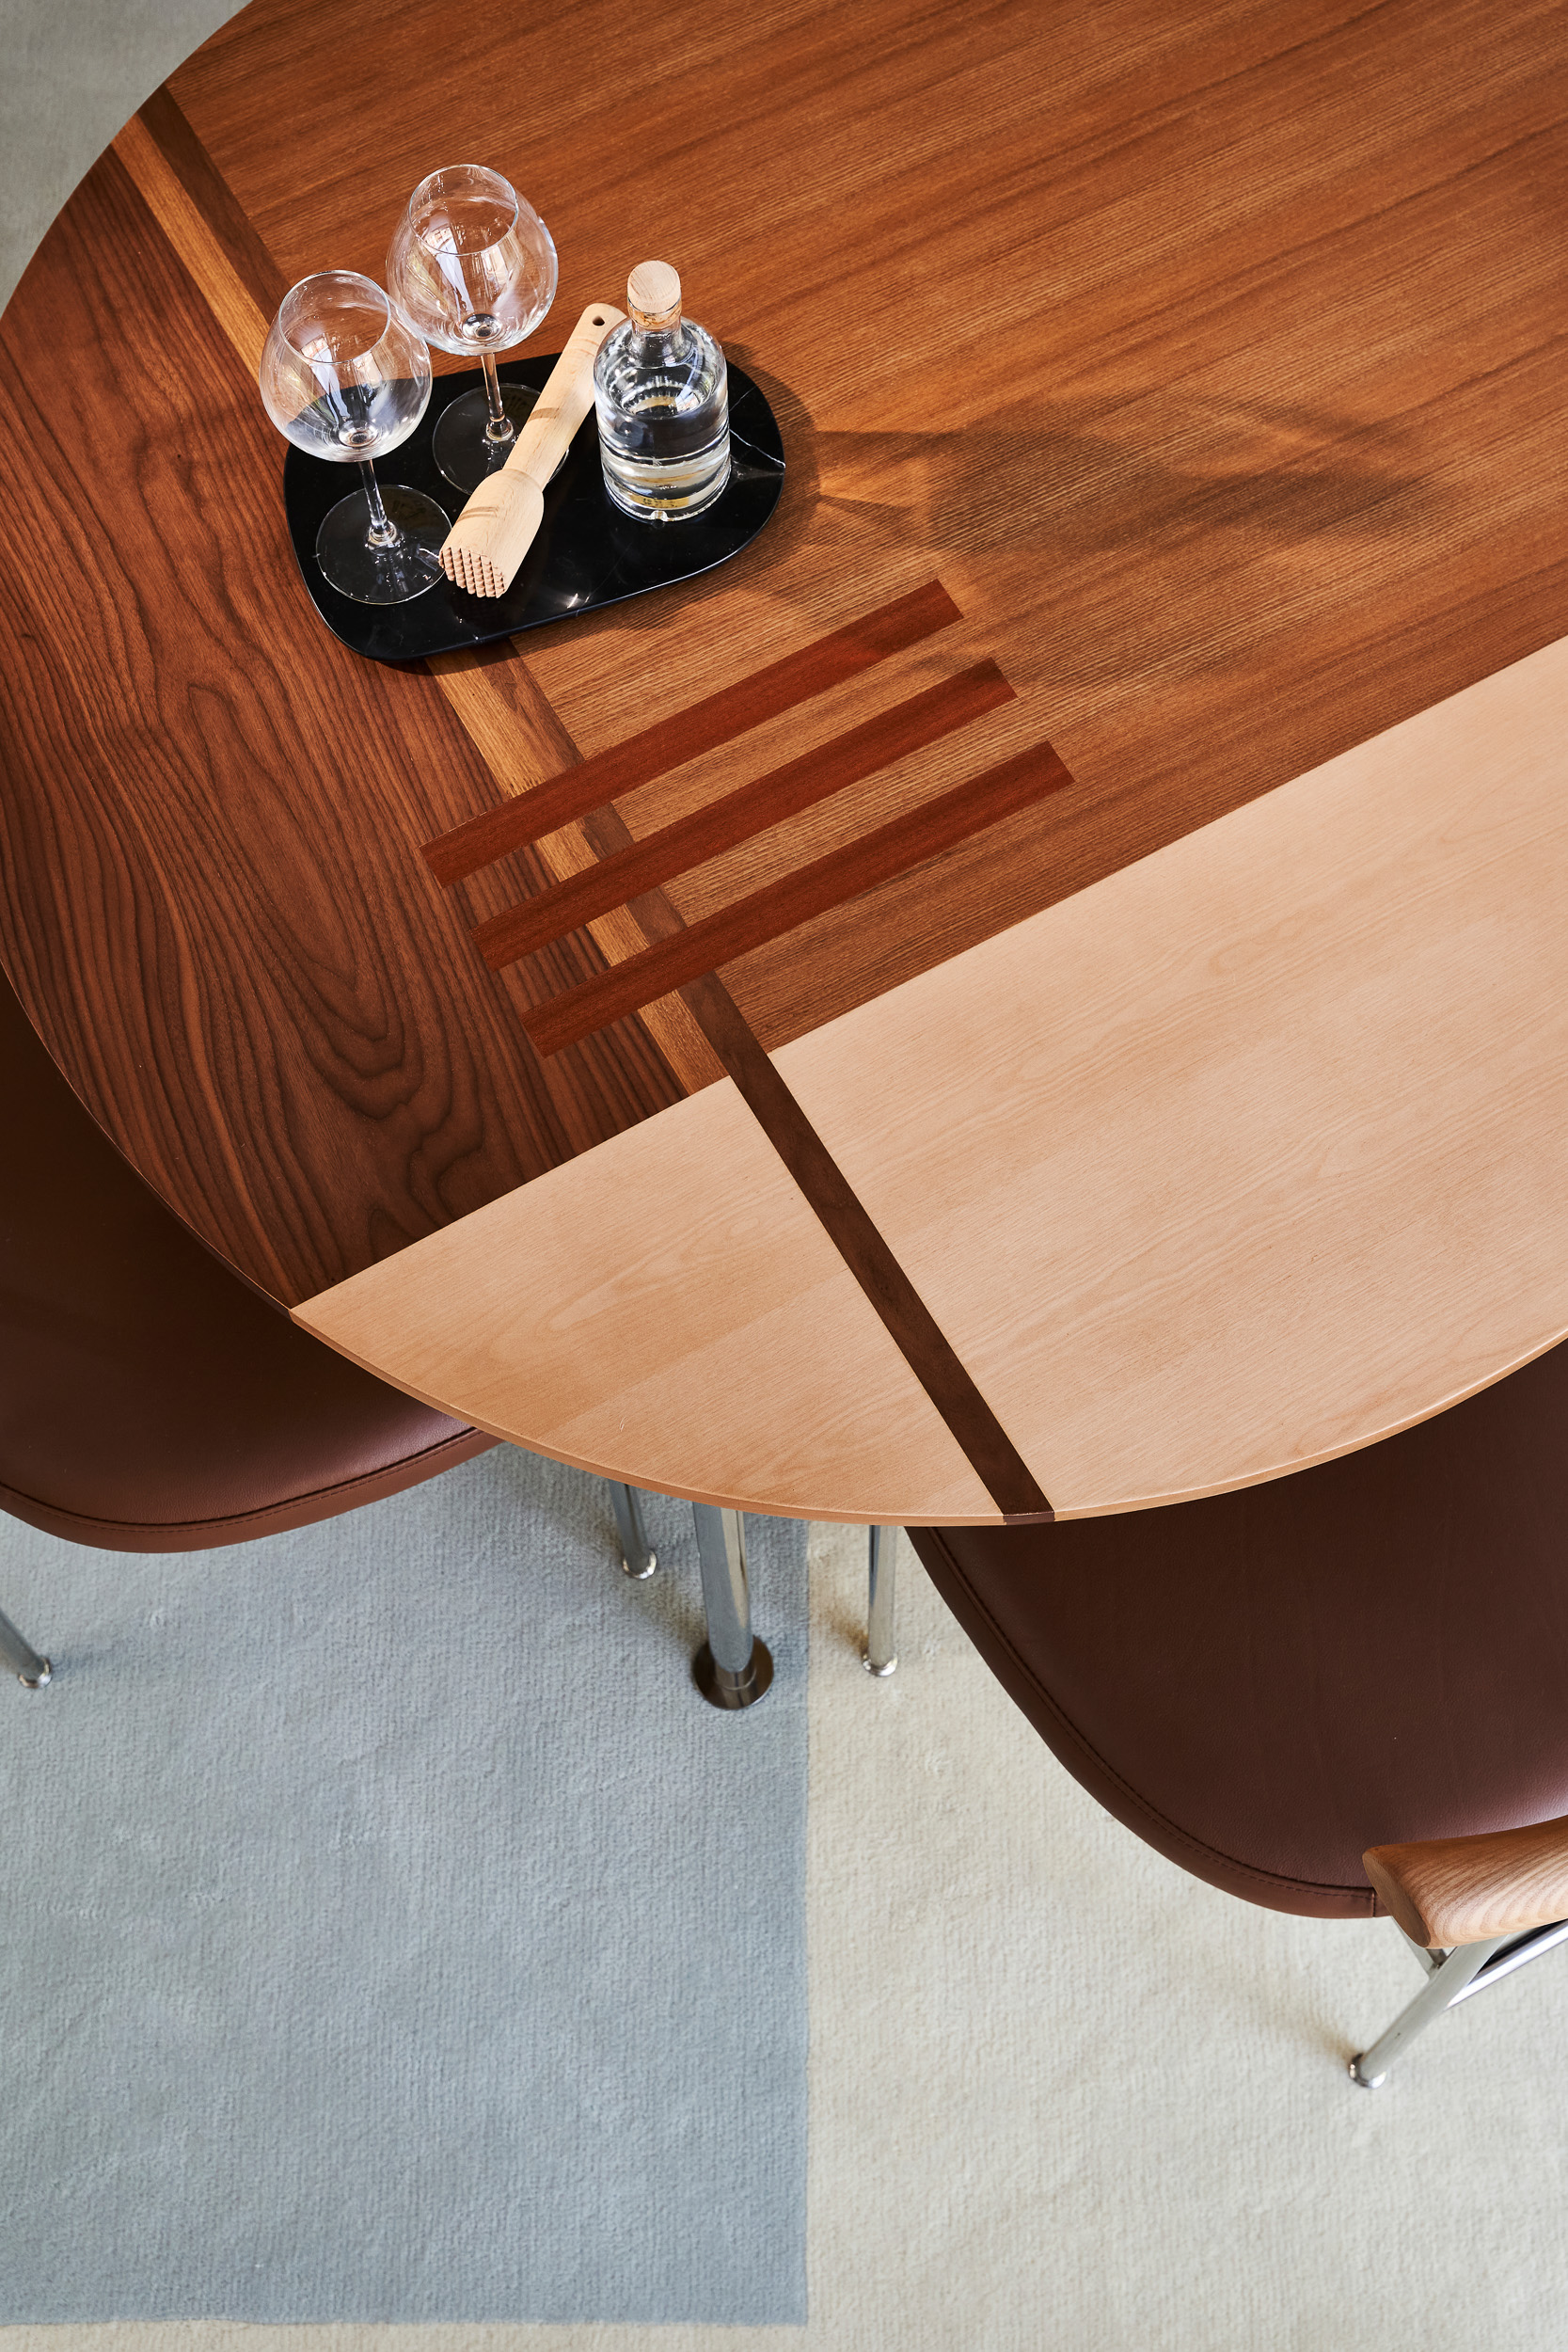 Woodlands Dining Table